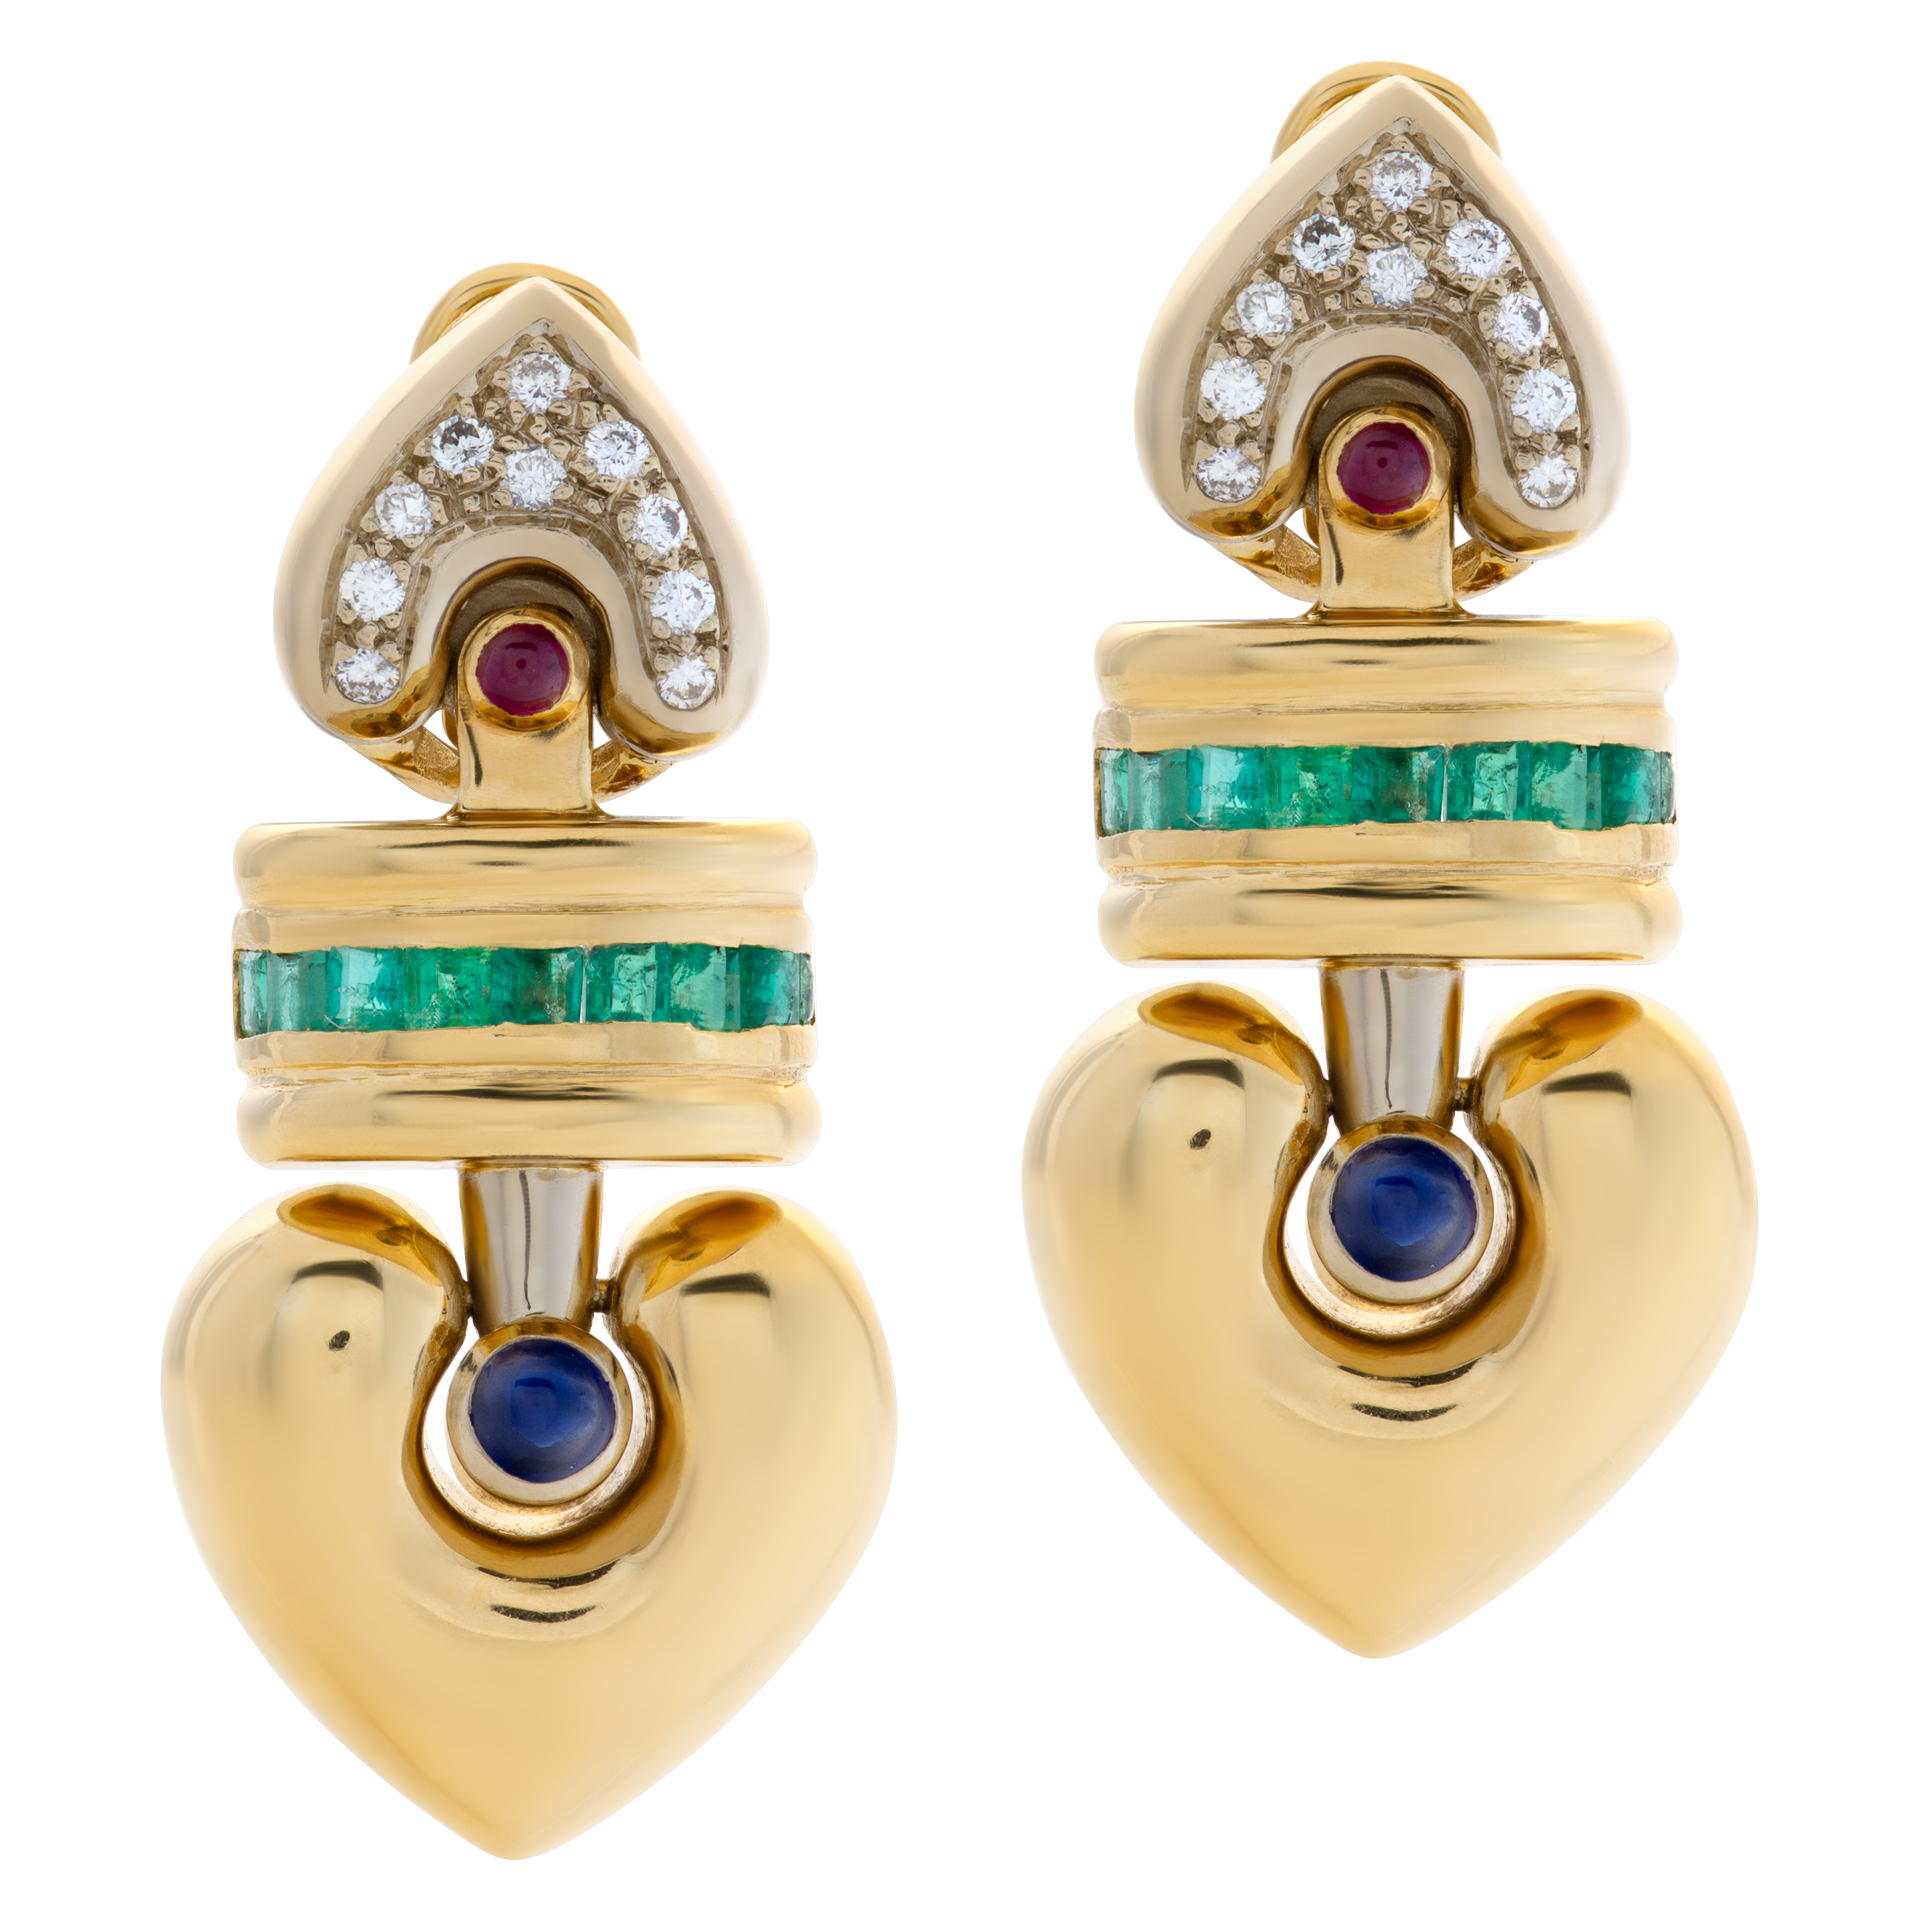 Heart earrings with diamonds, rubies, emeralds and sapphires